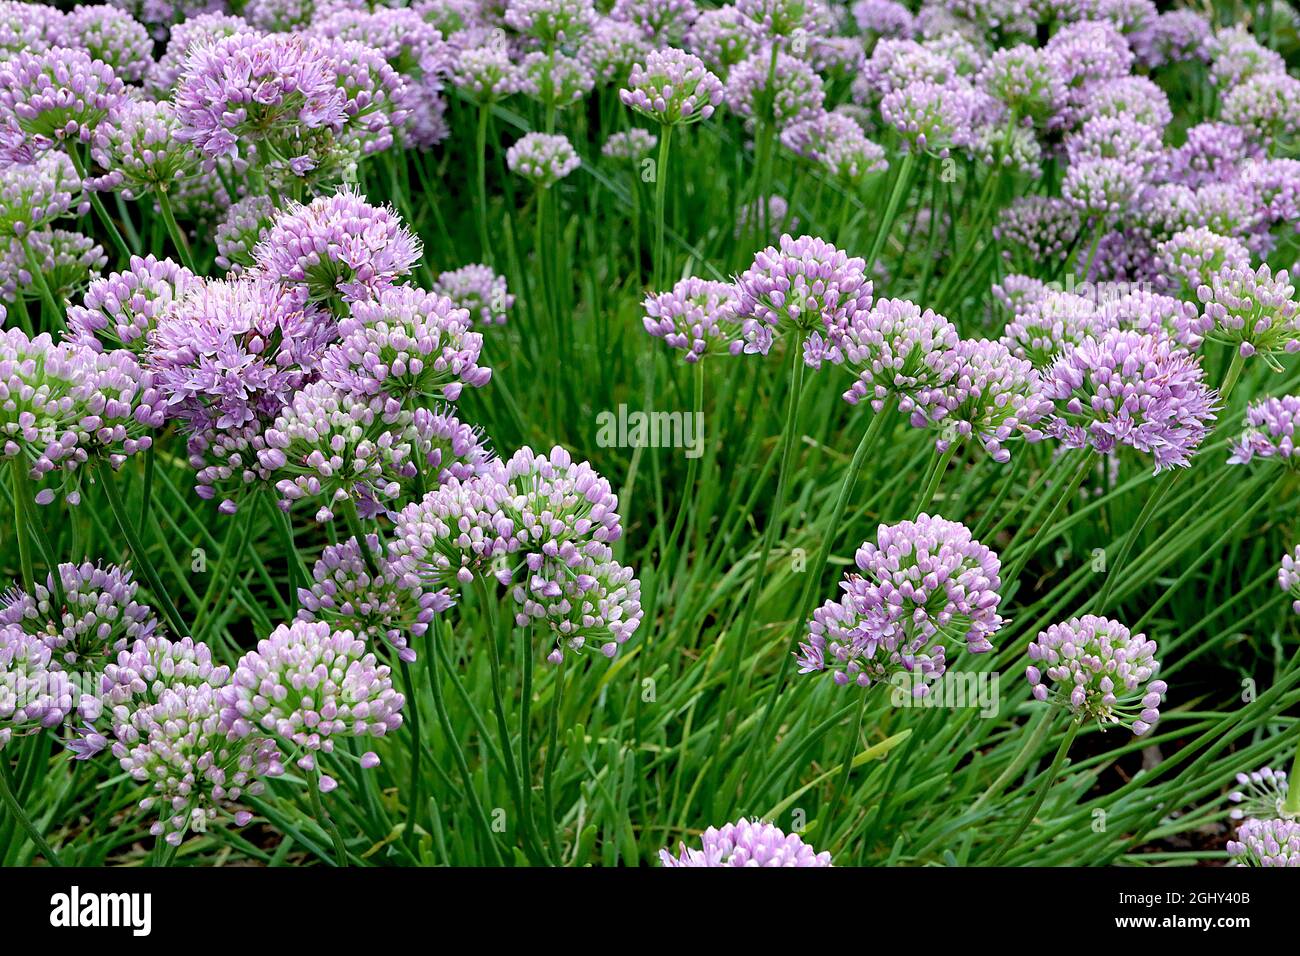 Allium senescens ‘Montana’ ageing allium Montana – small spherical clusters of lilac pink flowers and bright green linear leaves,  August, England, UK Stock Photo